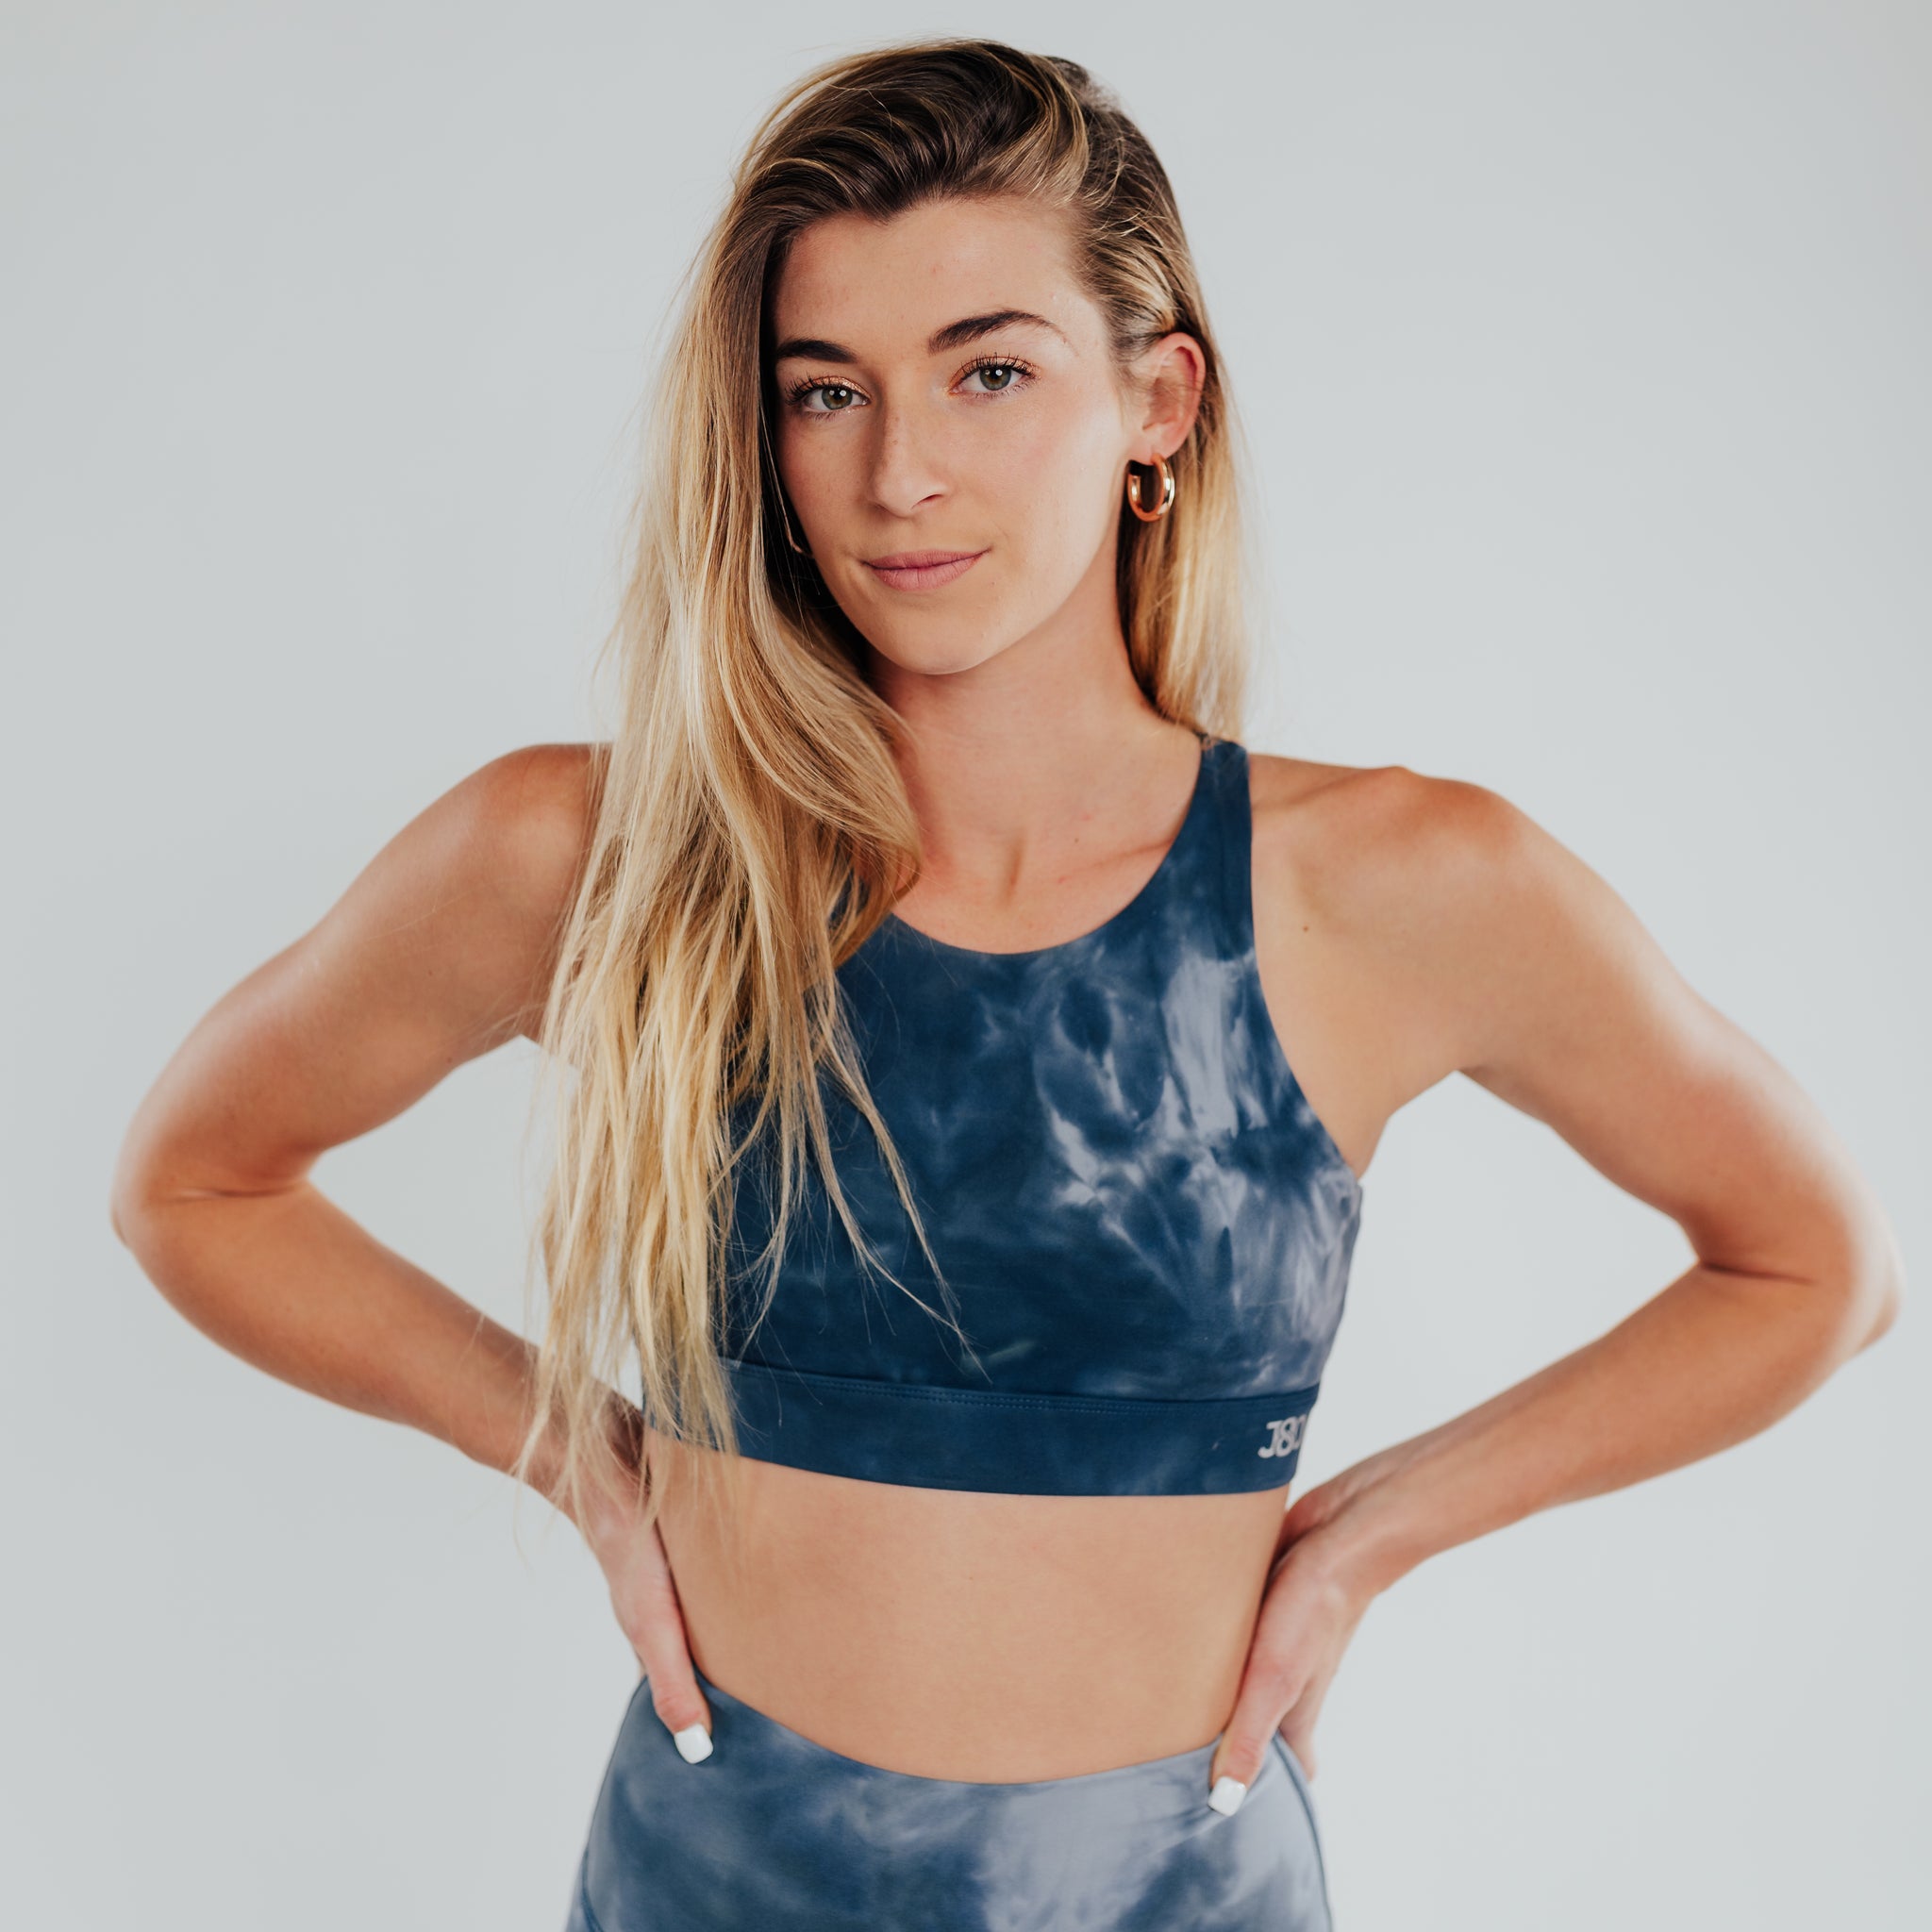 Sports Bras for sale in Newtons Crossroads, North Carolina